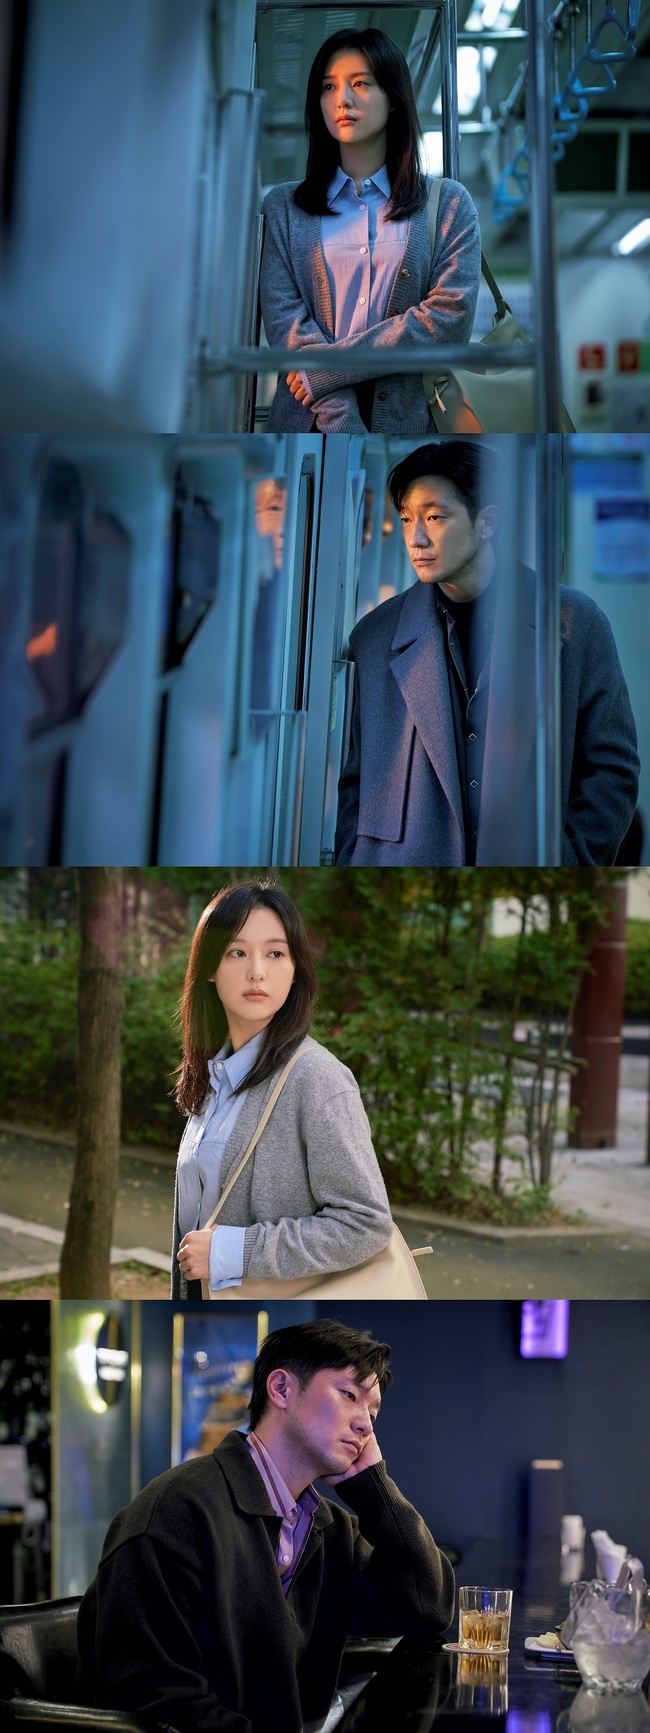 Will Kim Ji-won, Son Seokgu be The Slap?JTBCs Saturday Drama My My Liberation Diaryplayed by Hae-yeong Park/director Kim Seok-yoon) unveiled the images of Yeom Ji-won and Koo, who are spending the same Sight at the same place at another time on May 21.In the last broadcast, Yum Mi-jung and Gu finally got a sad farewell. Gu returned to the original place where the former boss and the members were, and Yum Mi-jung lost contact with him.However, Koo, who left everything behind, became empty eyes again as before, and Yum Mi-jung showed a different appearance.Unlike the past, when all those who left him wanted to be unhappy, he always wanted Mr.He walked alone on the street he walked with Mr. Koo and prayed for Mr. Koos happiness until the end.In the meantime, the photo released on the day shows a couple of friends who continue their daily lives after breaking up. The two who became Alone live in an empty space in the corner of their hearts.Yum Mi-jung looks back suddenly while walking the road, and Gu, who is sitting at the bar, is a face that thinks about recalling Yum Mi-jung.In addition, the appearance of two people captured in the same space at different times leaves a deep lull.The two men, who are throwing their Sight into the sunset outside the train, still look like each other looking out at a distance.